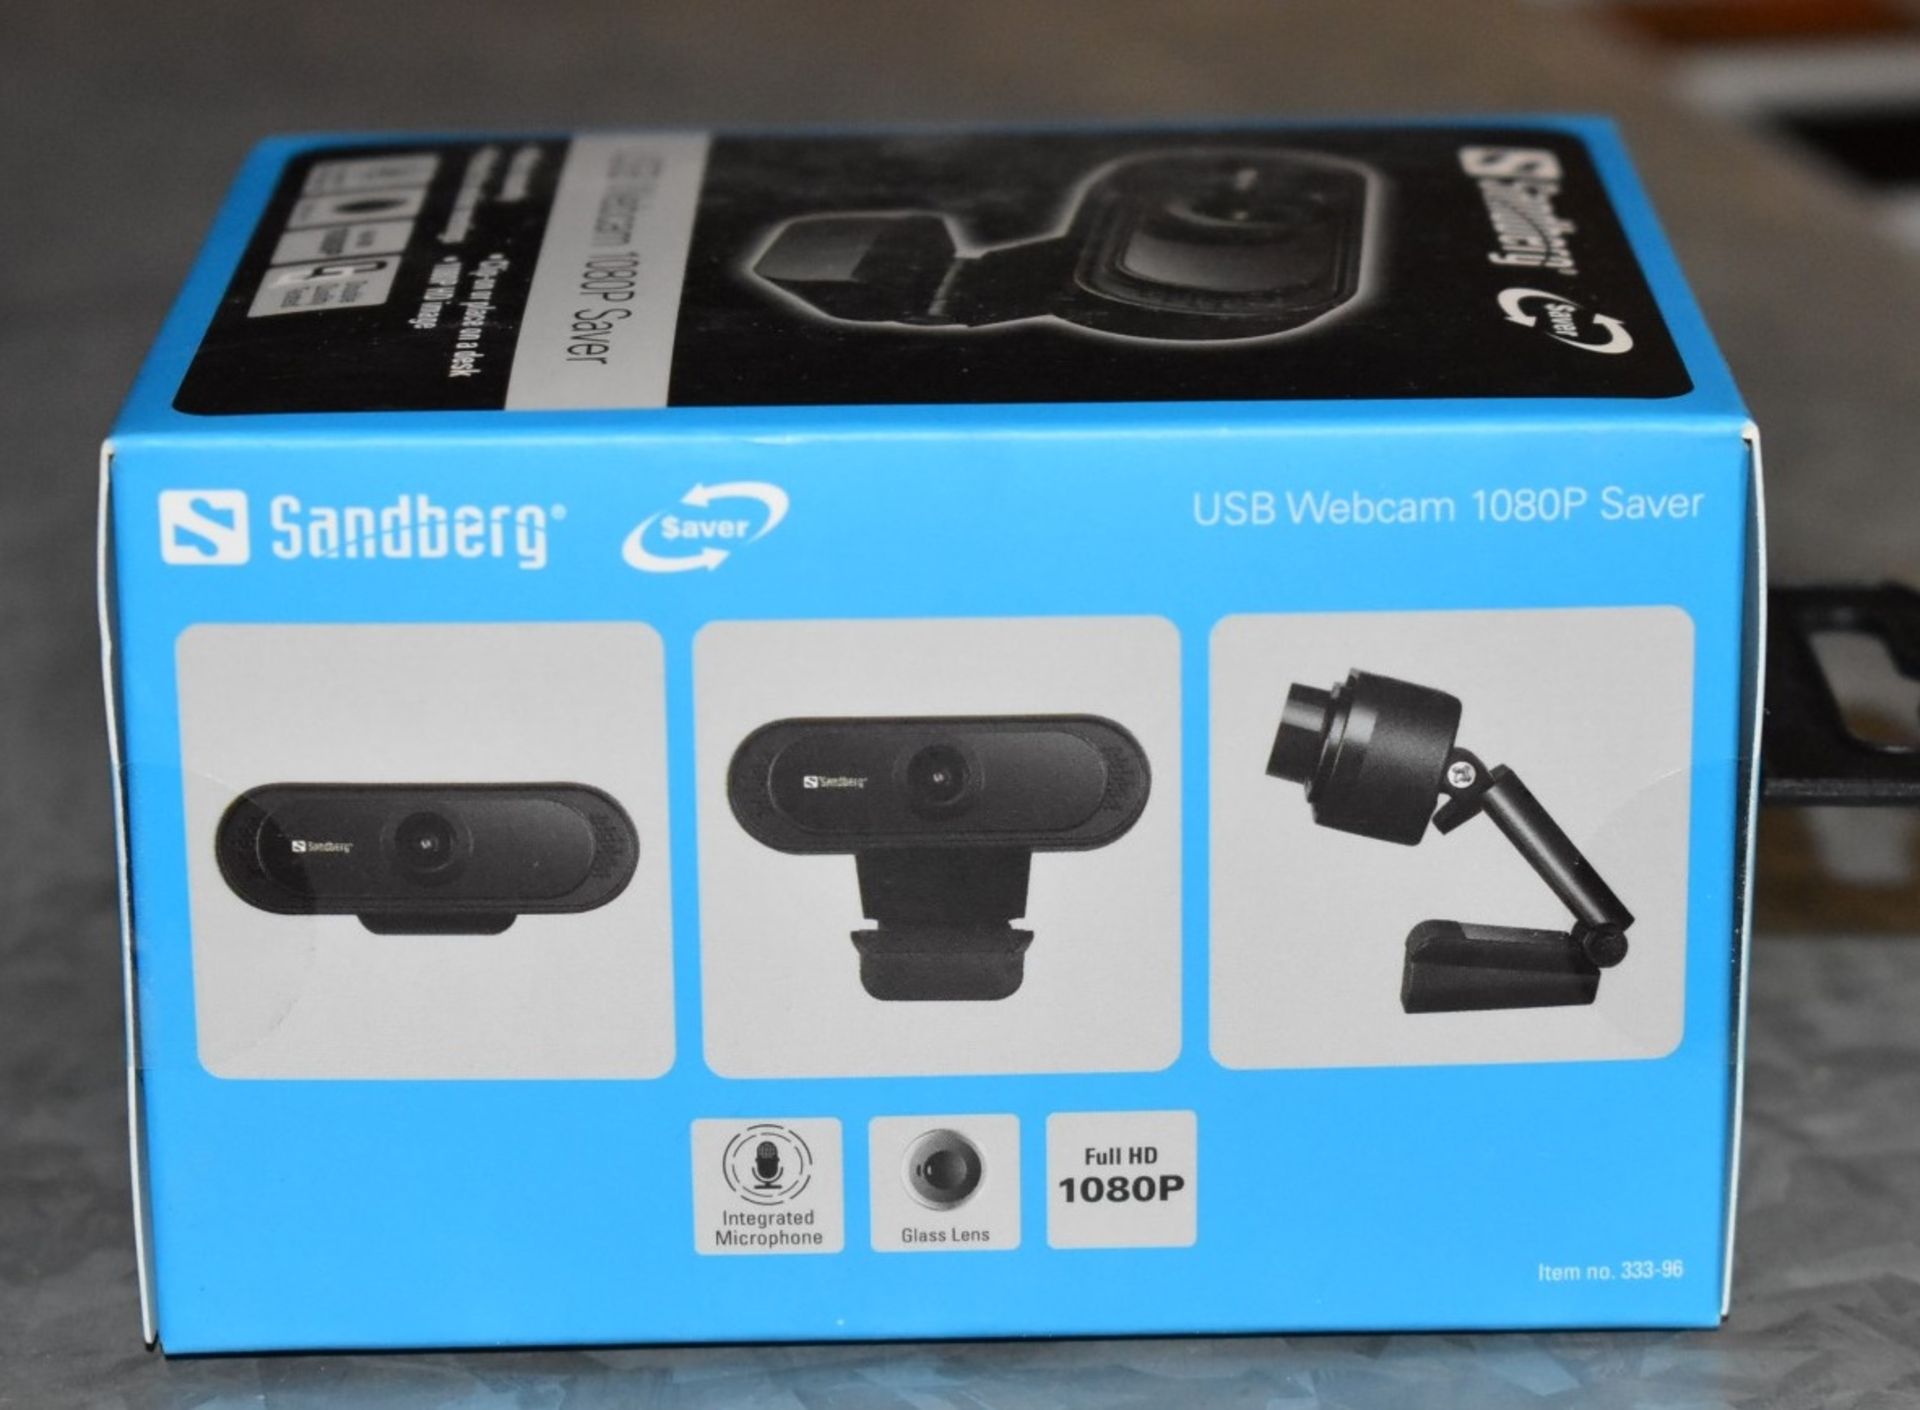 1 x Sandberg USB Full HD 1080p Webcam With Microphone - RRP £34.99 - New Boxed Stock - Ref: AC94 - Image 3 of 3